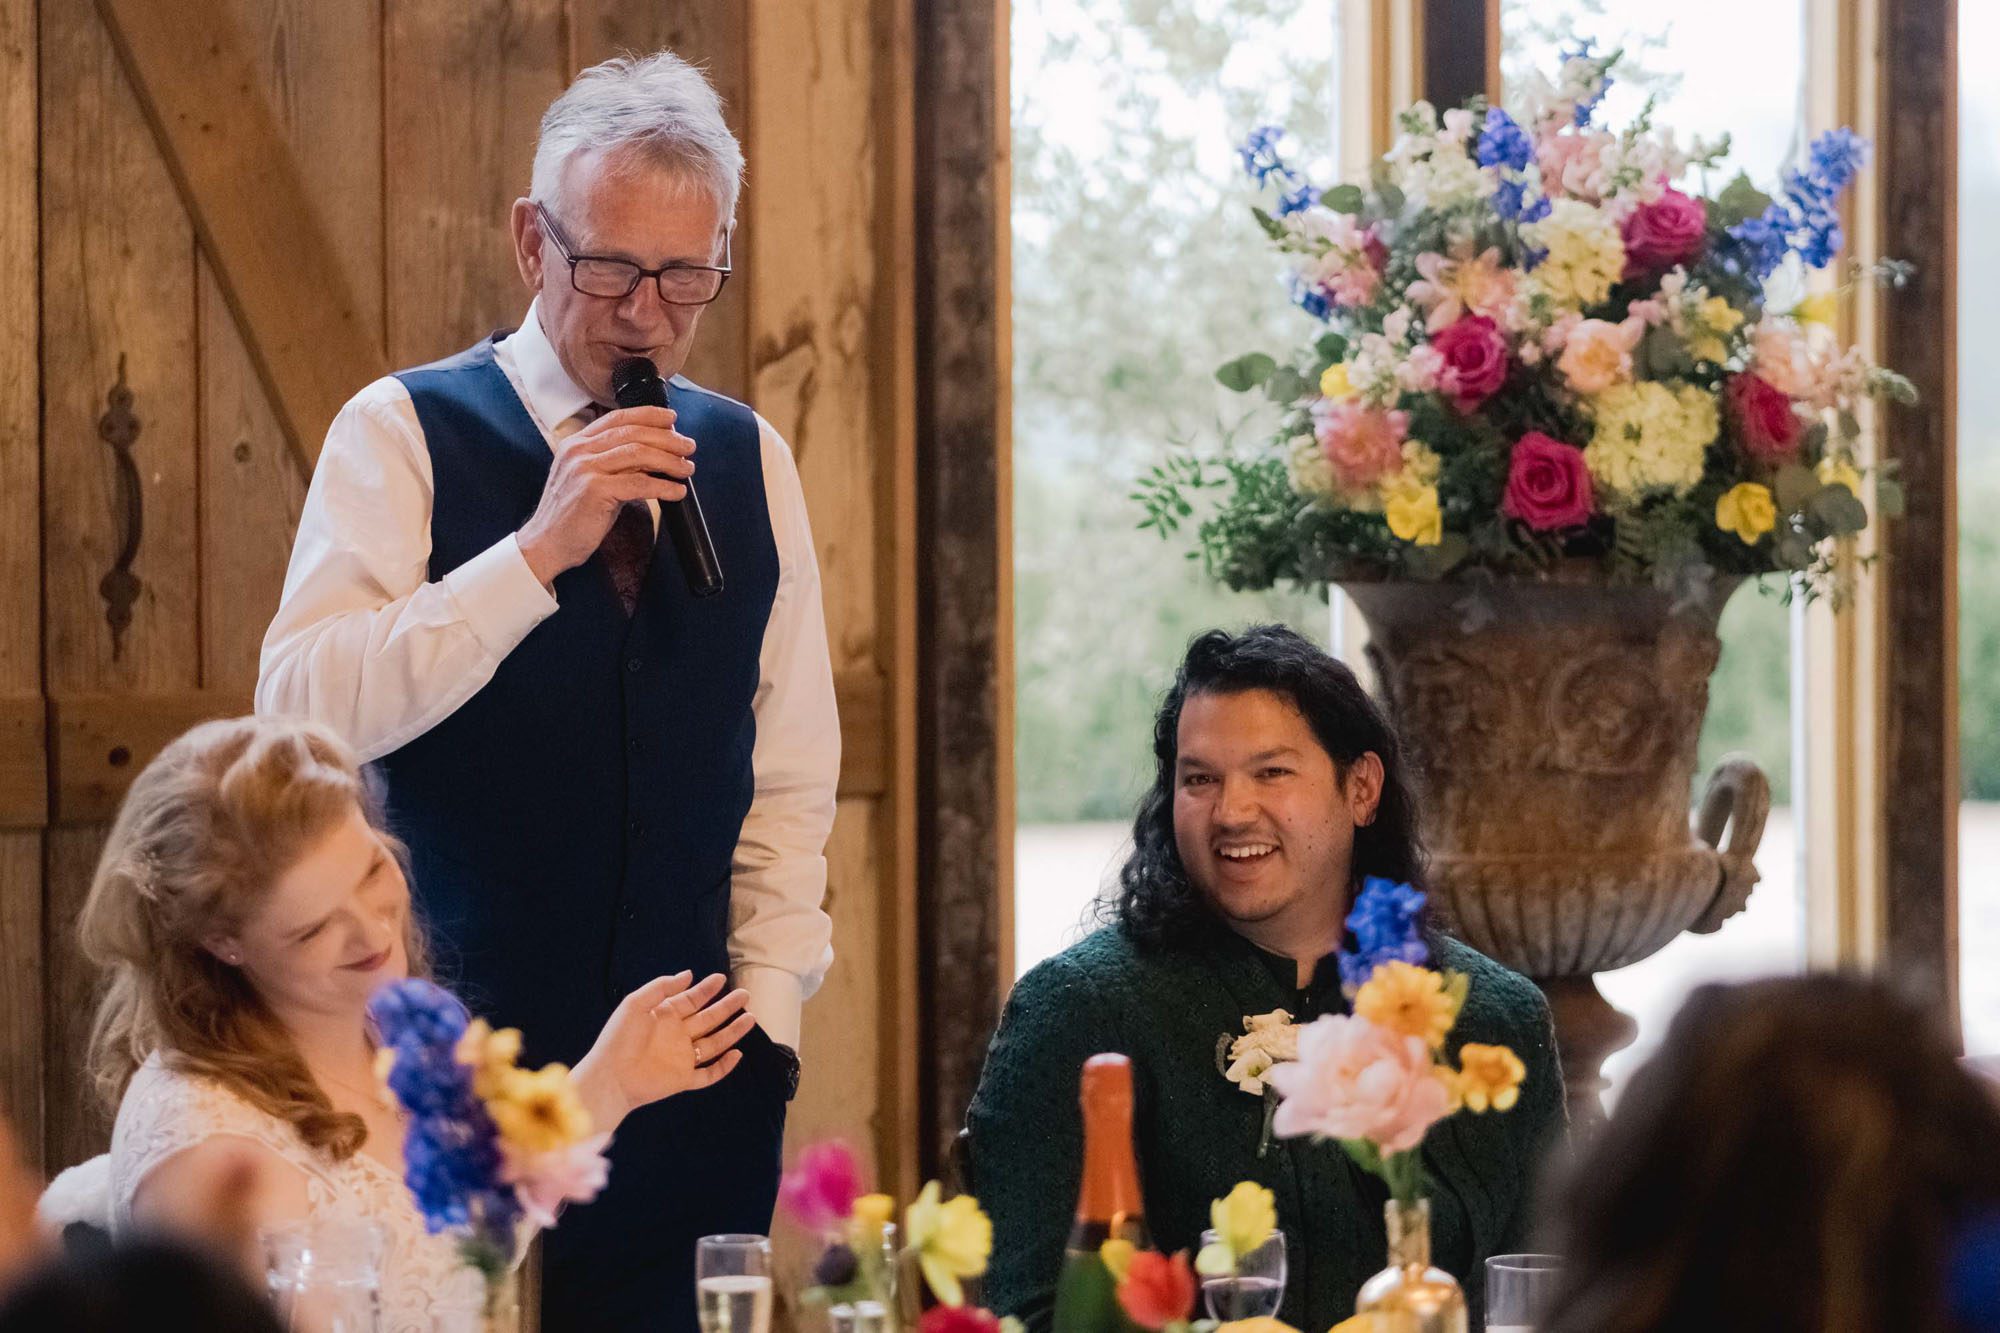 Father of the bride delivers his speech at a wedding.